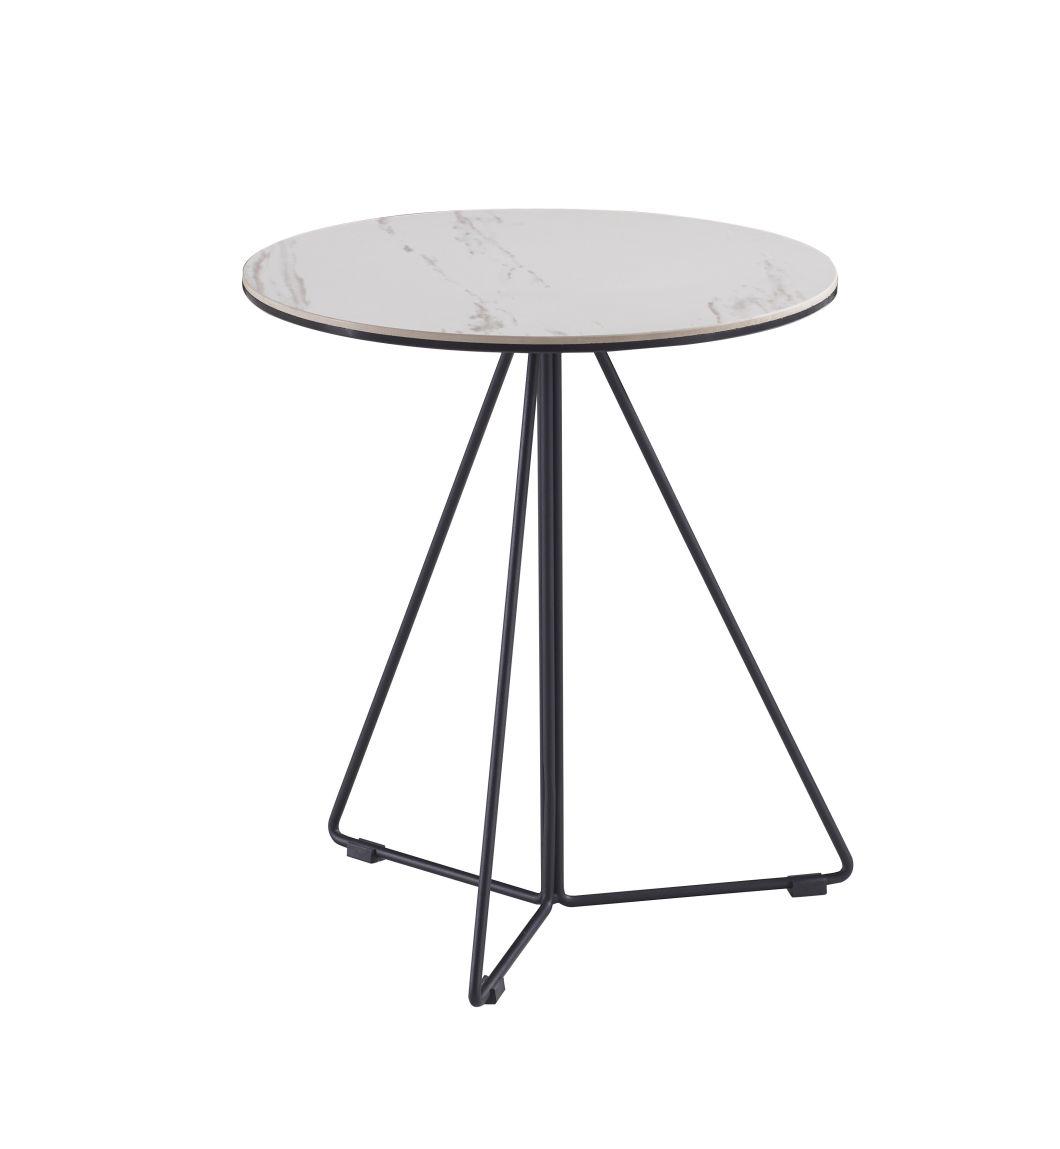 Cj-047 Ceramic Top Side Table /Ceramic Coffee Table /Home Furniture /Hotel Furniture /Metal Coffee Table/Wooden Coffee Table